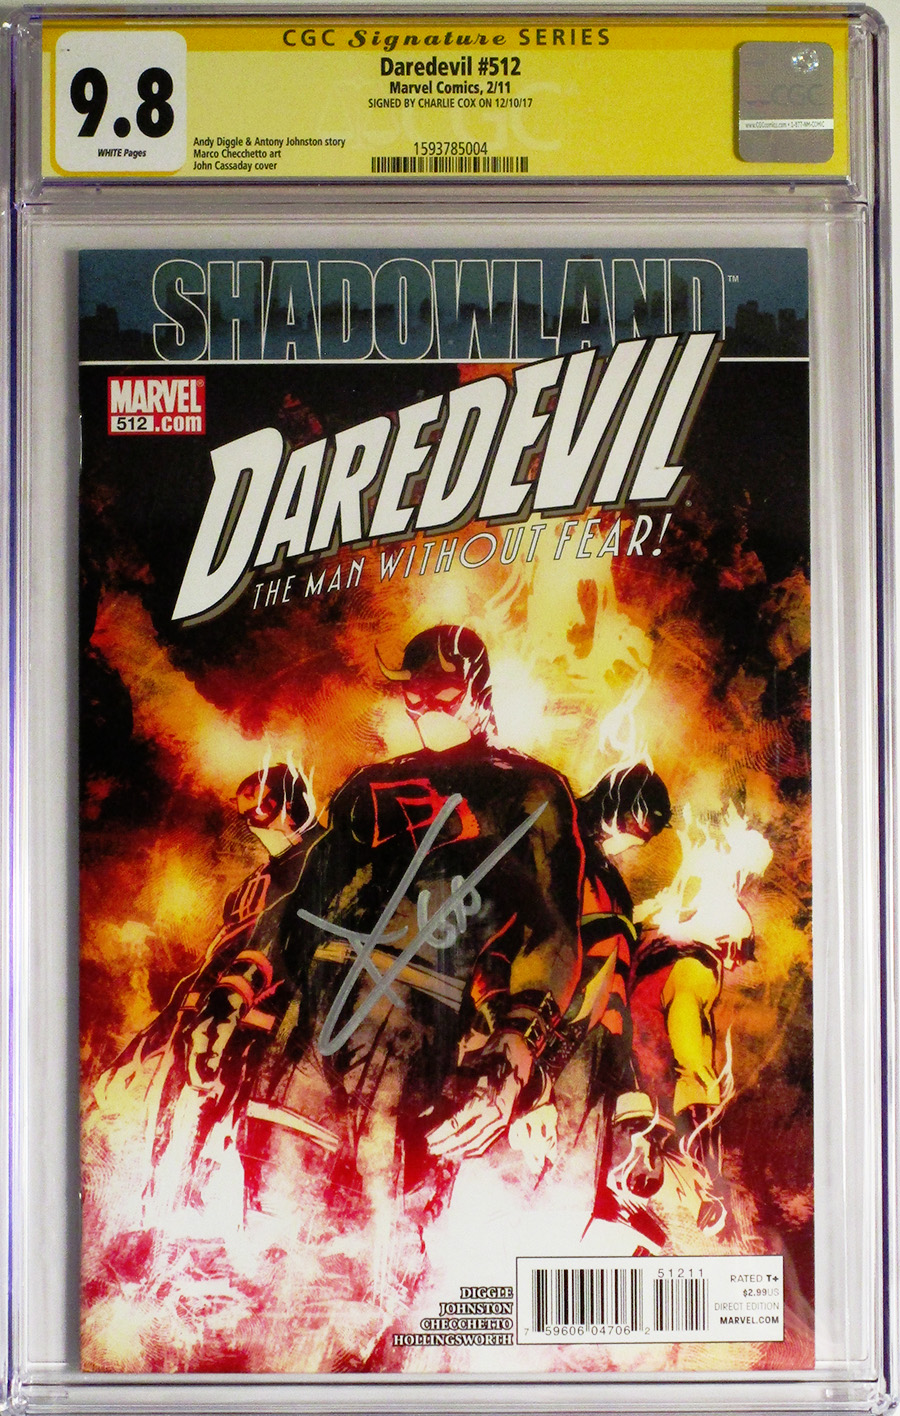 Daredevil Vol 2 #512 Cover B CGC Signature Series 9.8 Signed by Charlie Cox (Shadowland Tie-In)